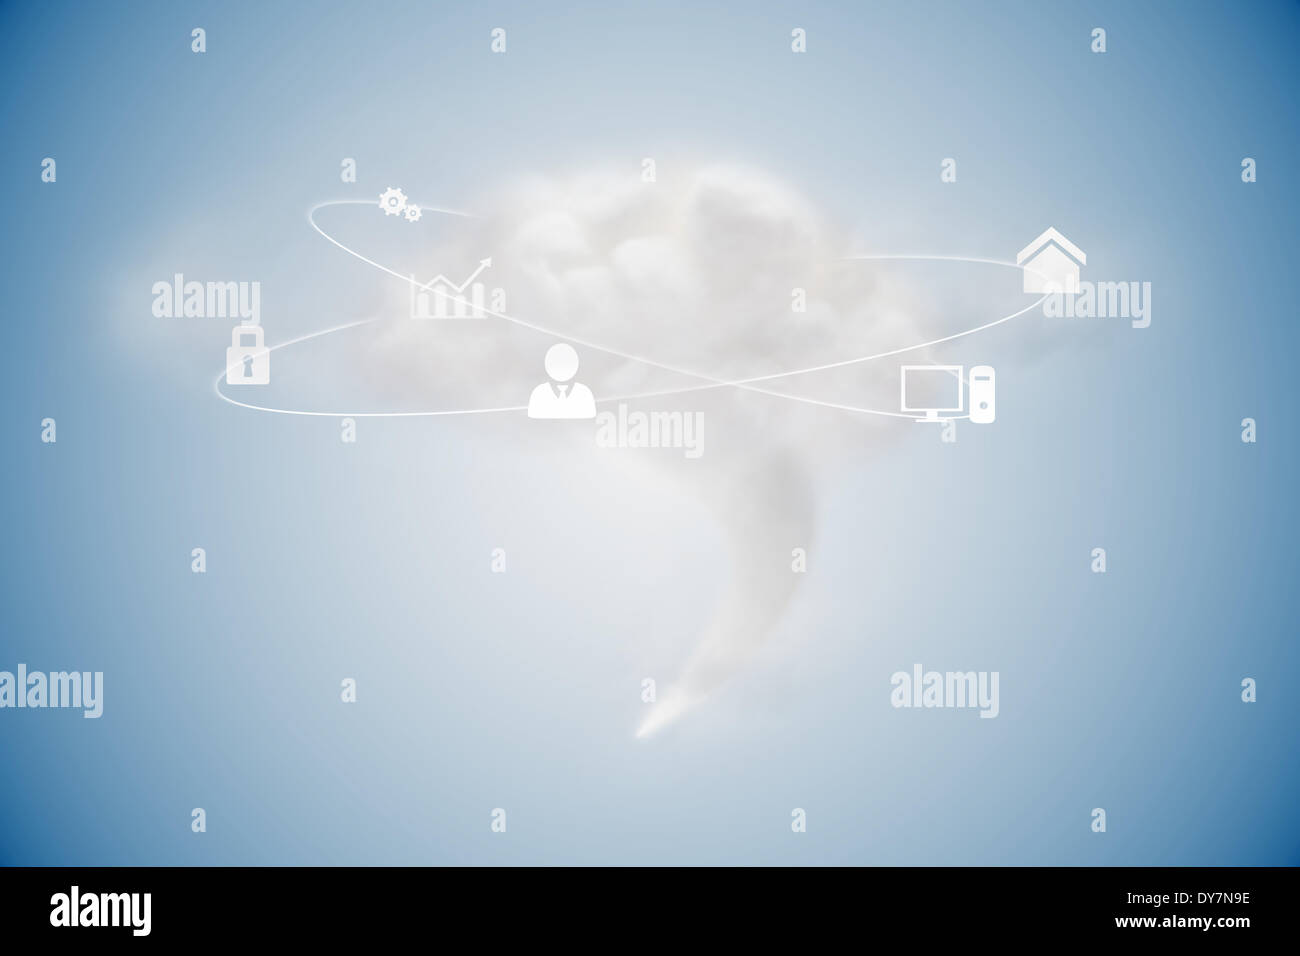 Cloud computing graphic with icons Stock Photo